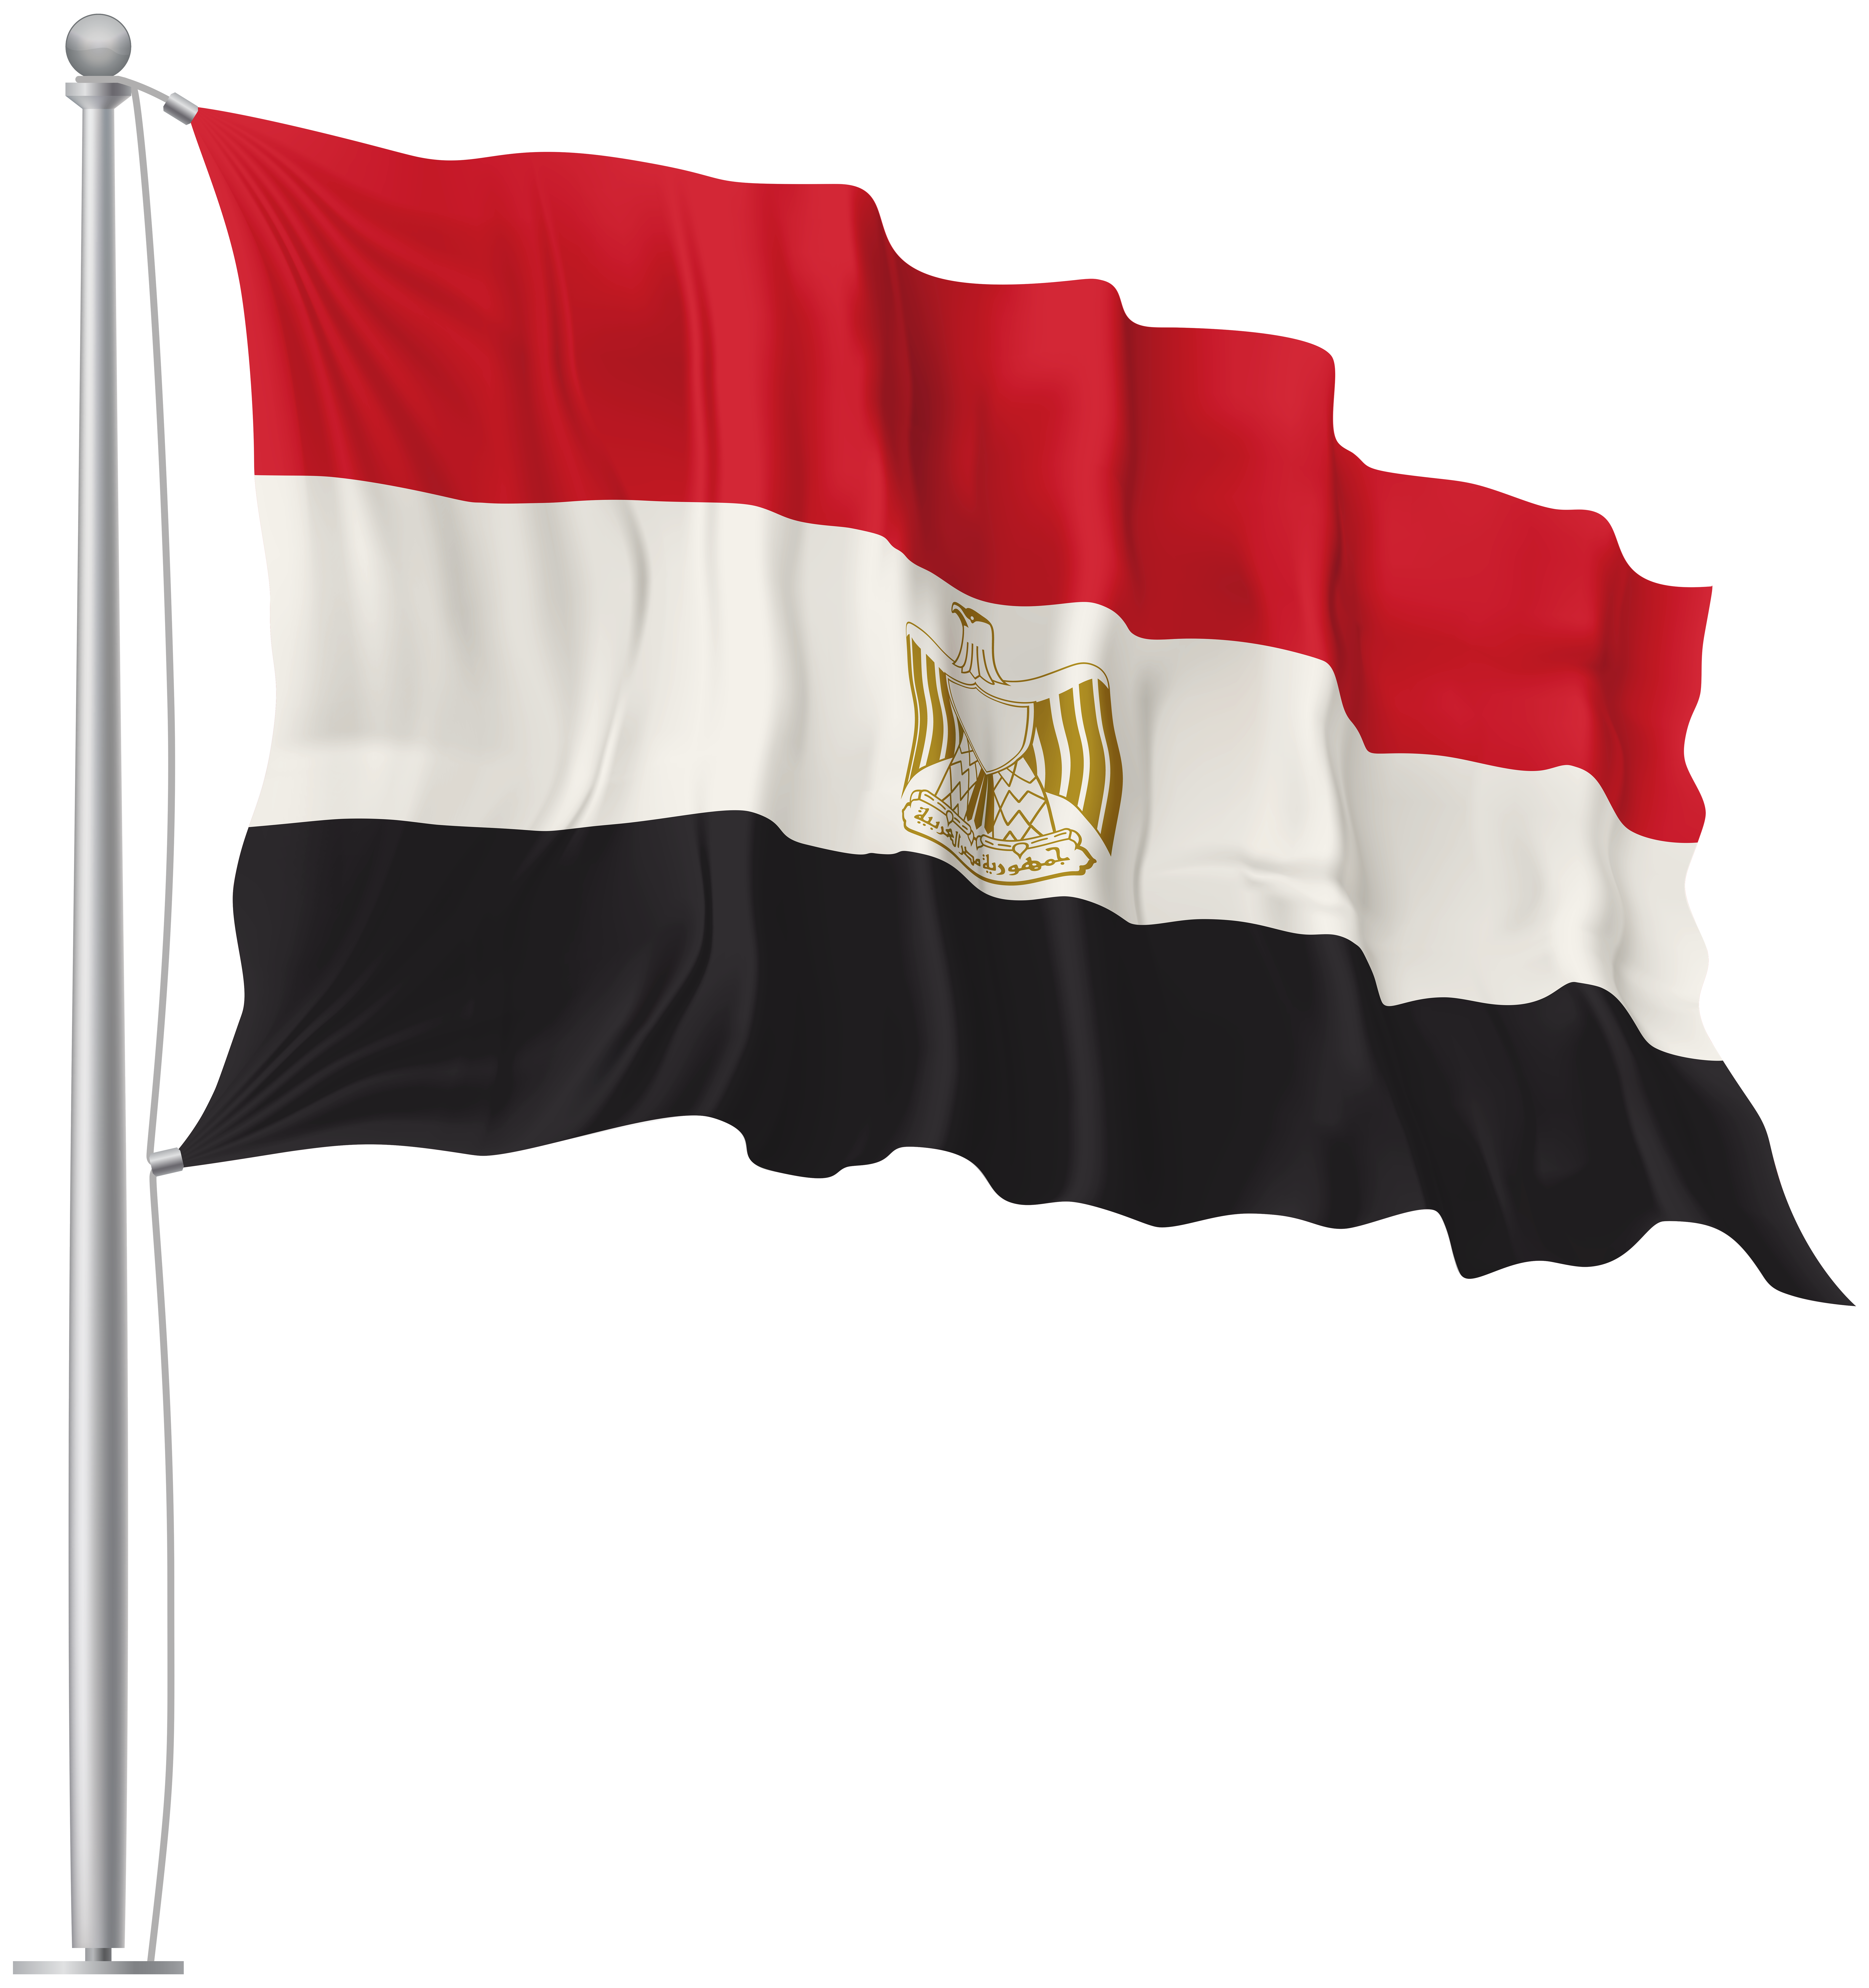 Egypt Waving Flag PNG Image Quality Image And Transparent PNG Free Clipart